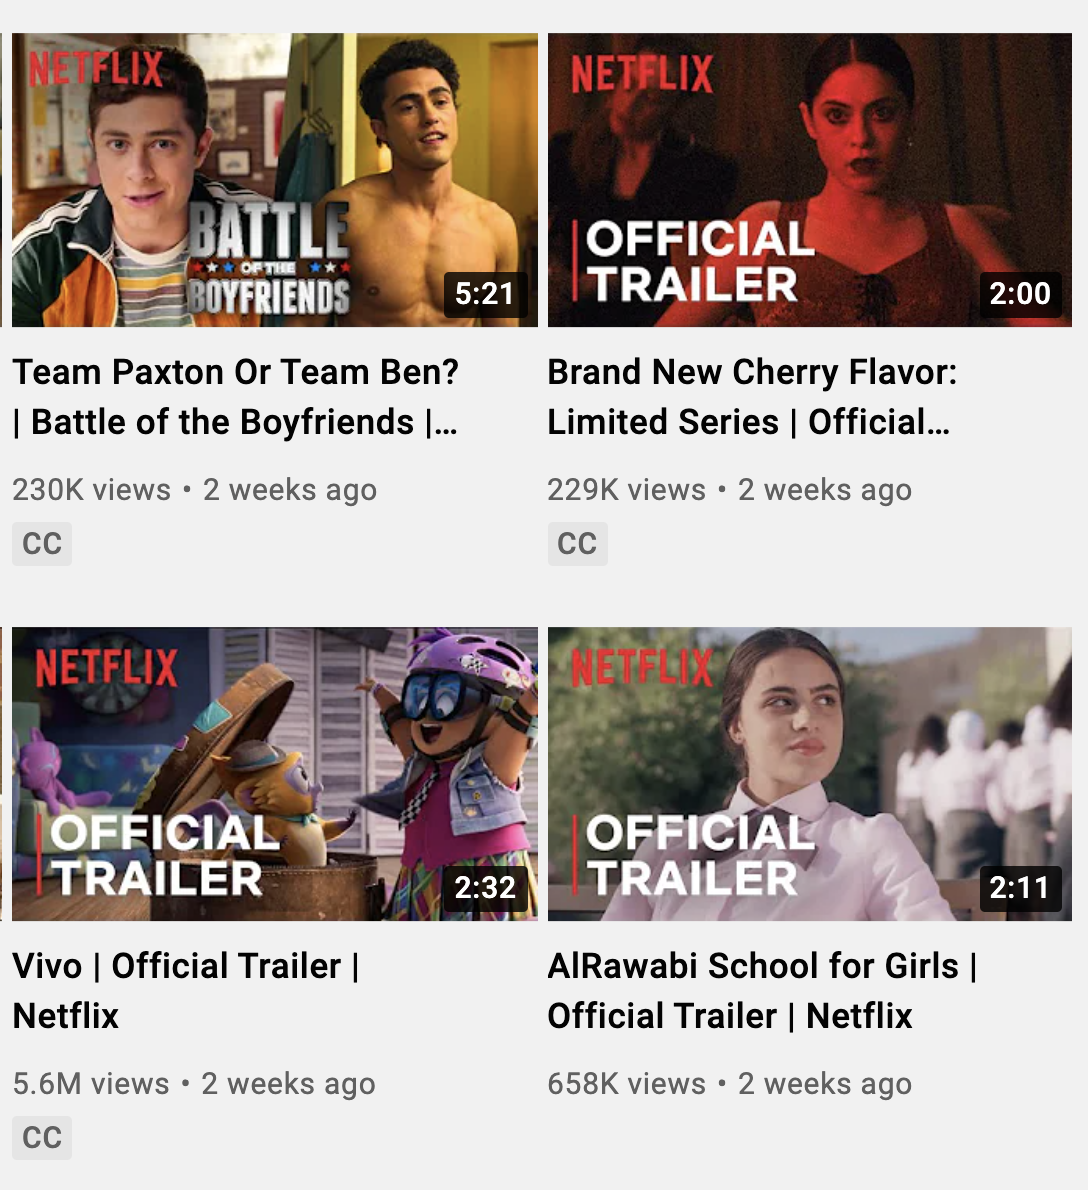 netflix trailers on their youtube channel